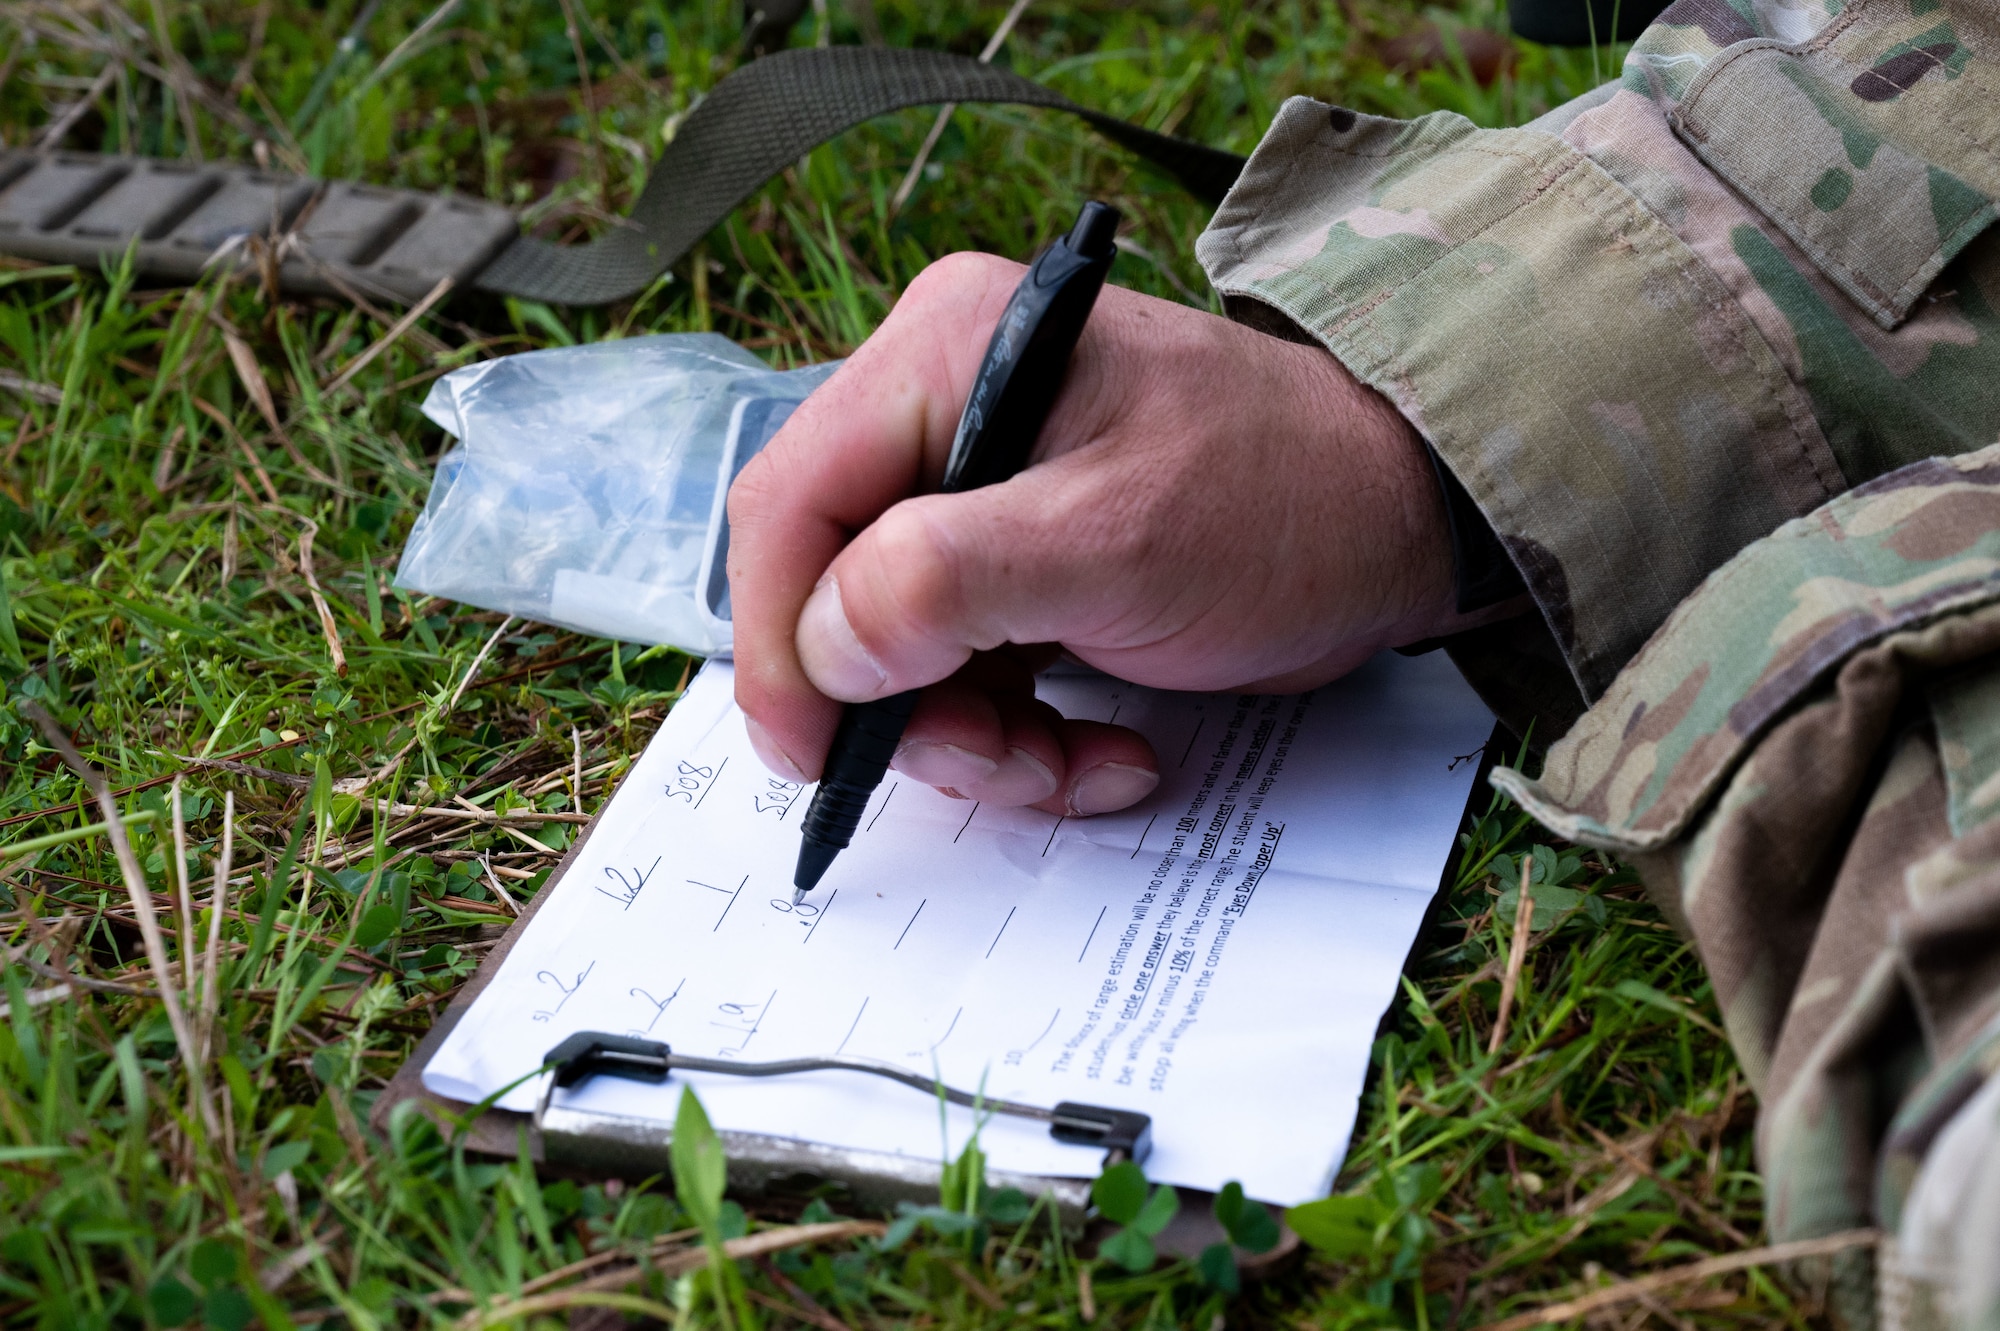 An Airman from the 19th Security Forces Squadron writes on a range card during an Advanced Designated Marksman course